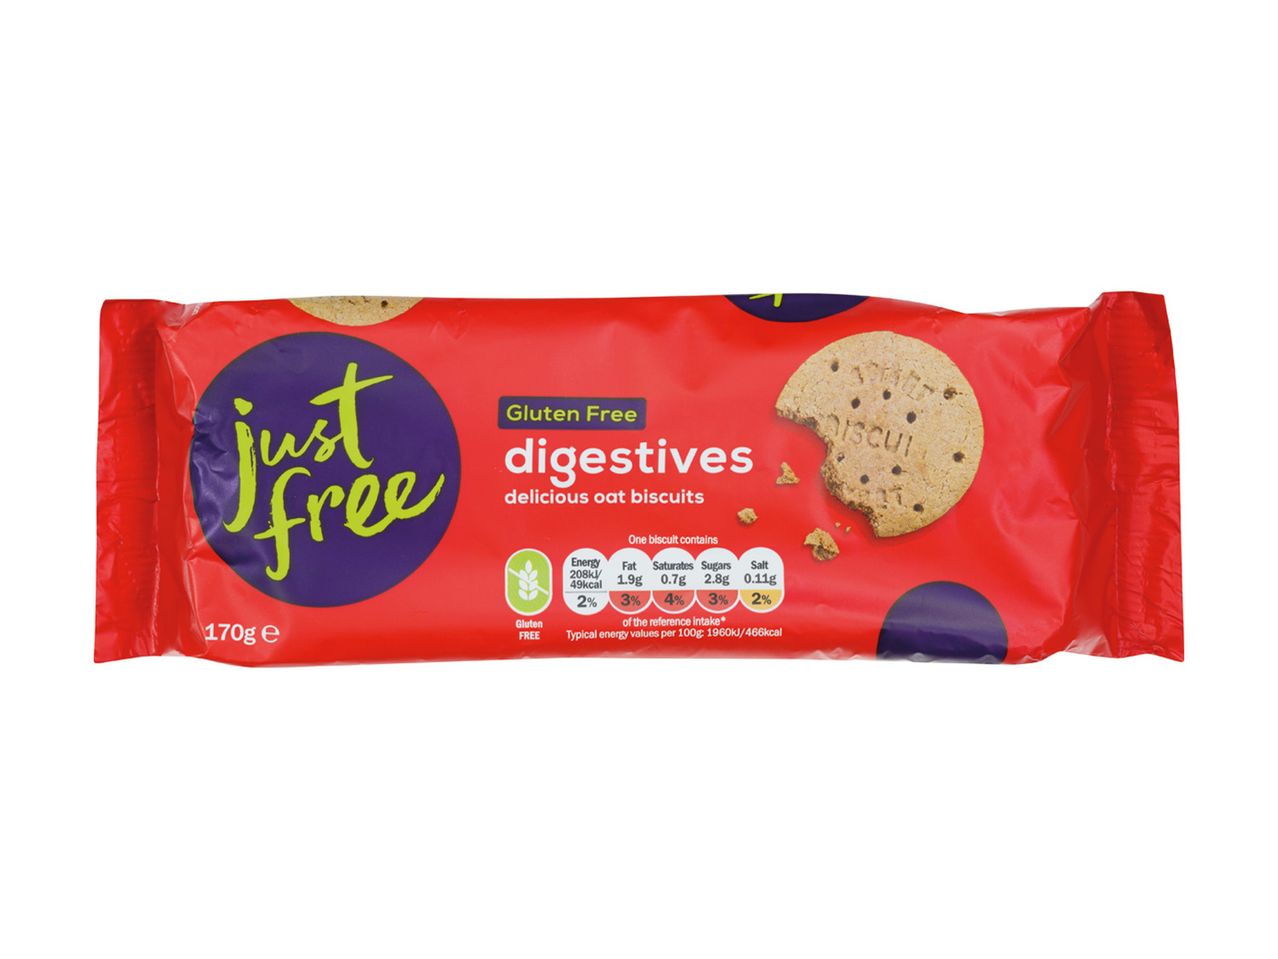 Go to full screen view: Just Free Digestives - Image 1